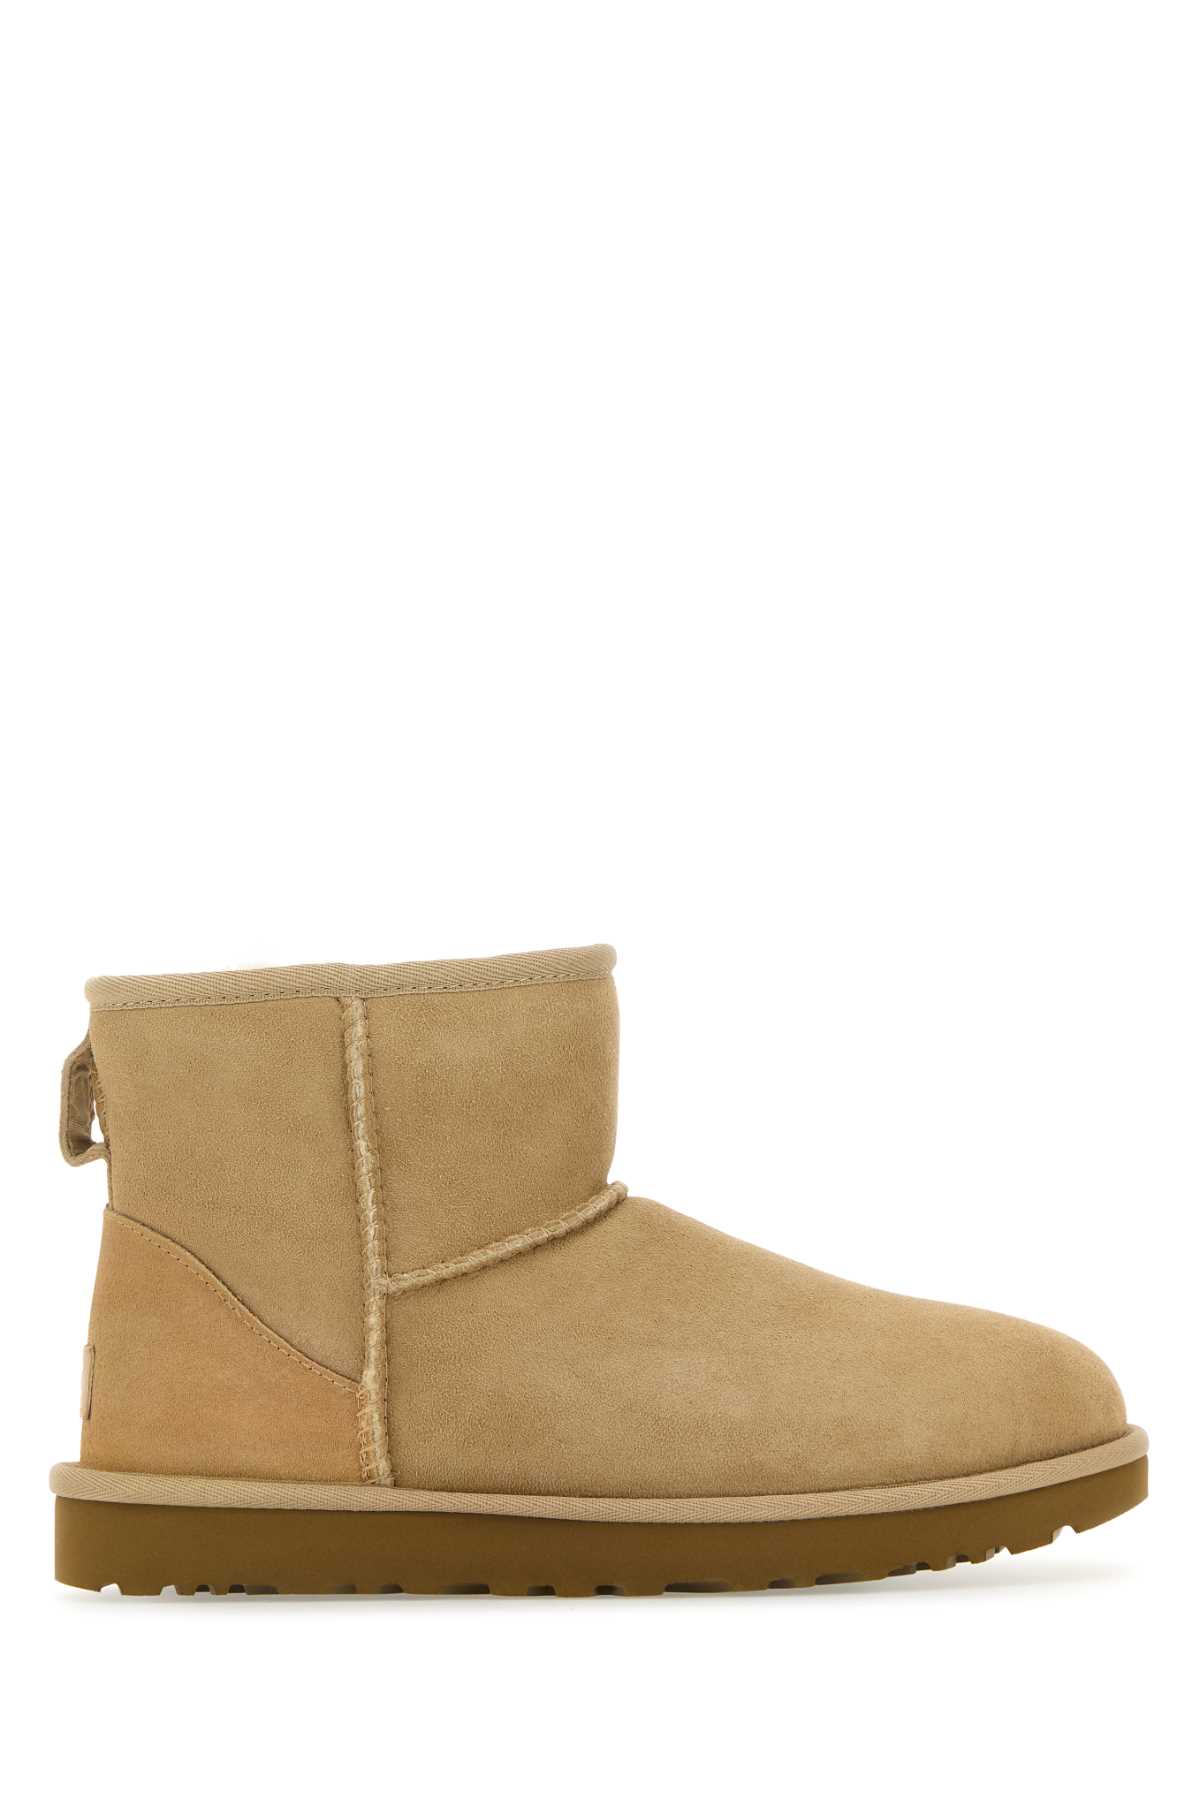 Sand Suede Classic Ultra Mini Ankle Boots